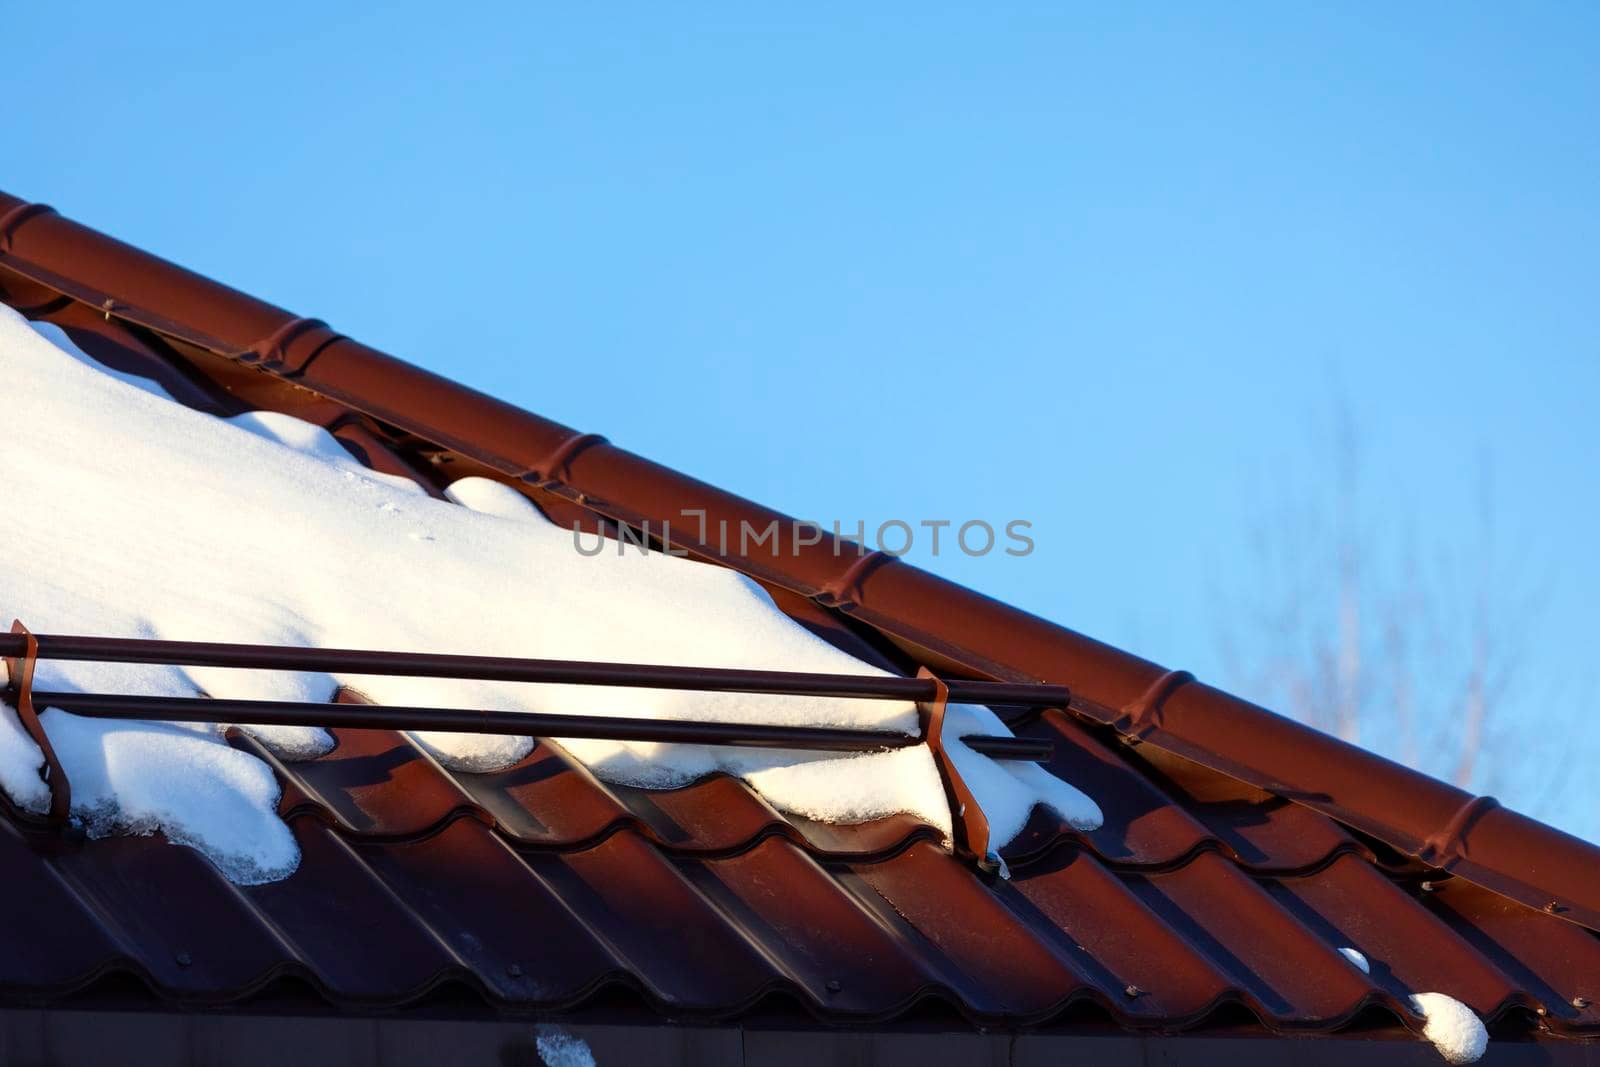 Melting snow on the metal roof and blue sky above by Nobilior